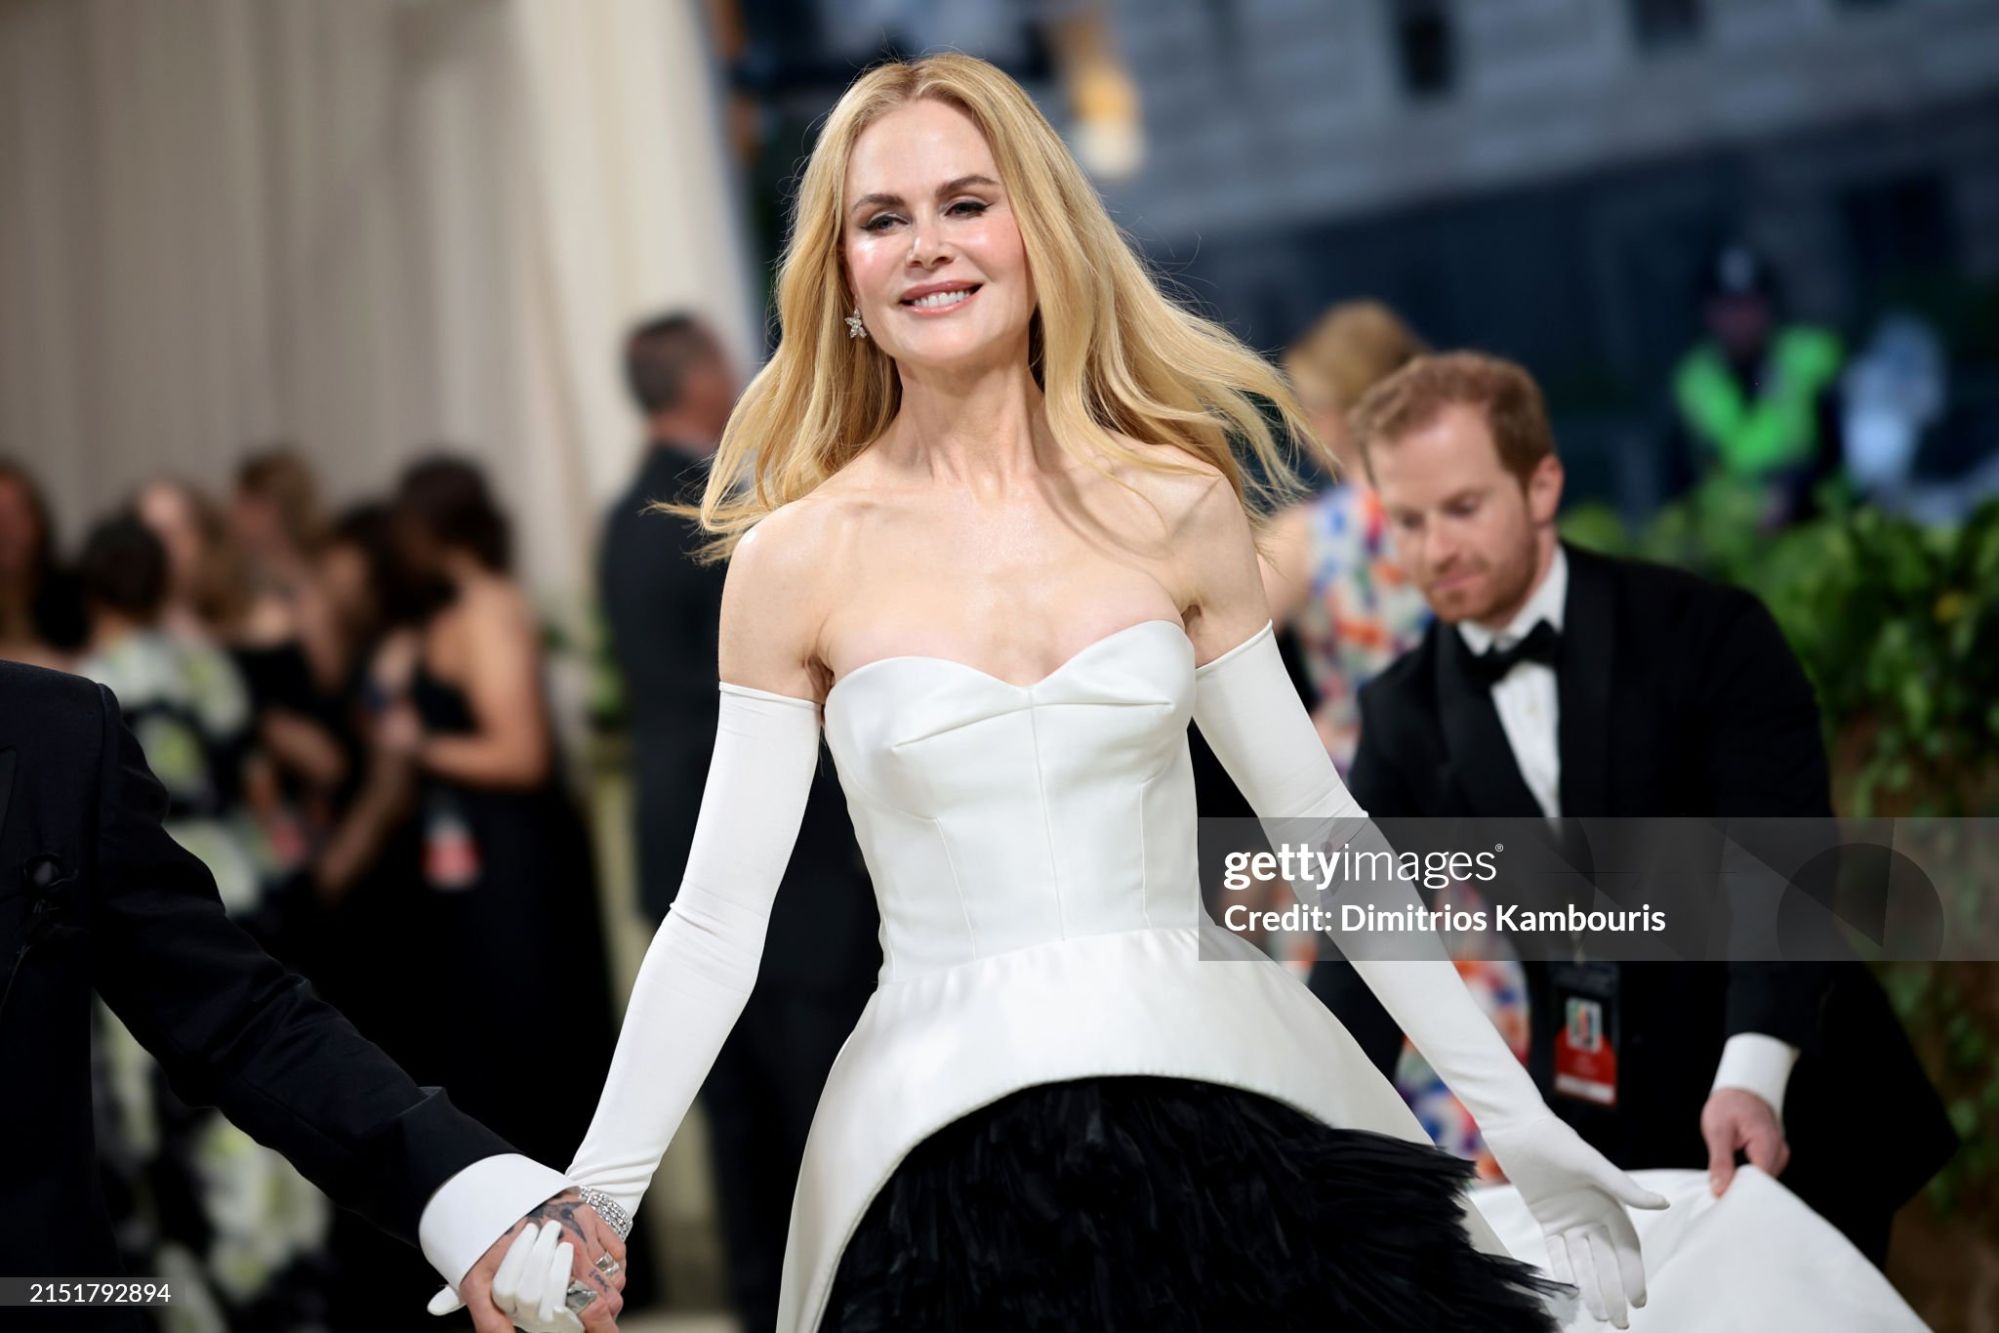 gettyimages-2151792894-2048x2048.jpg